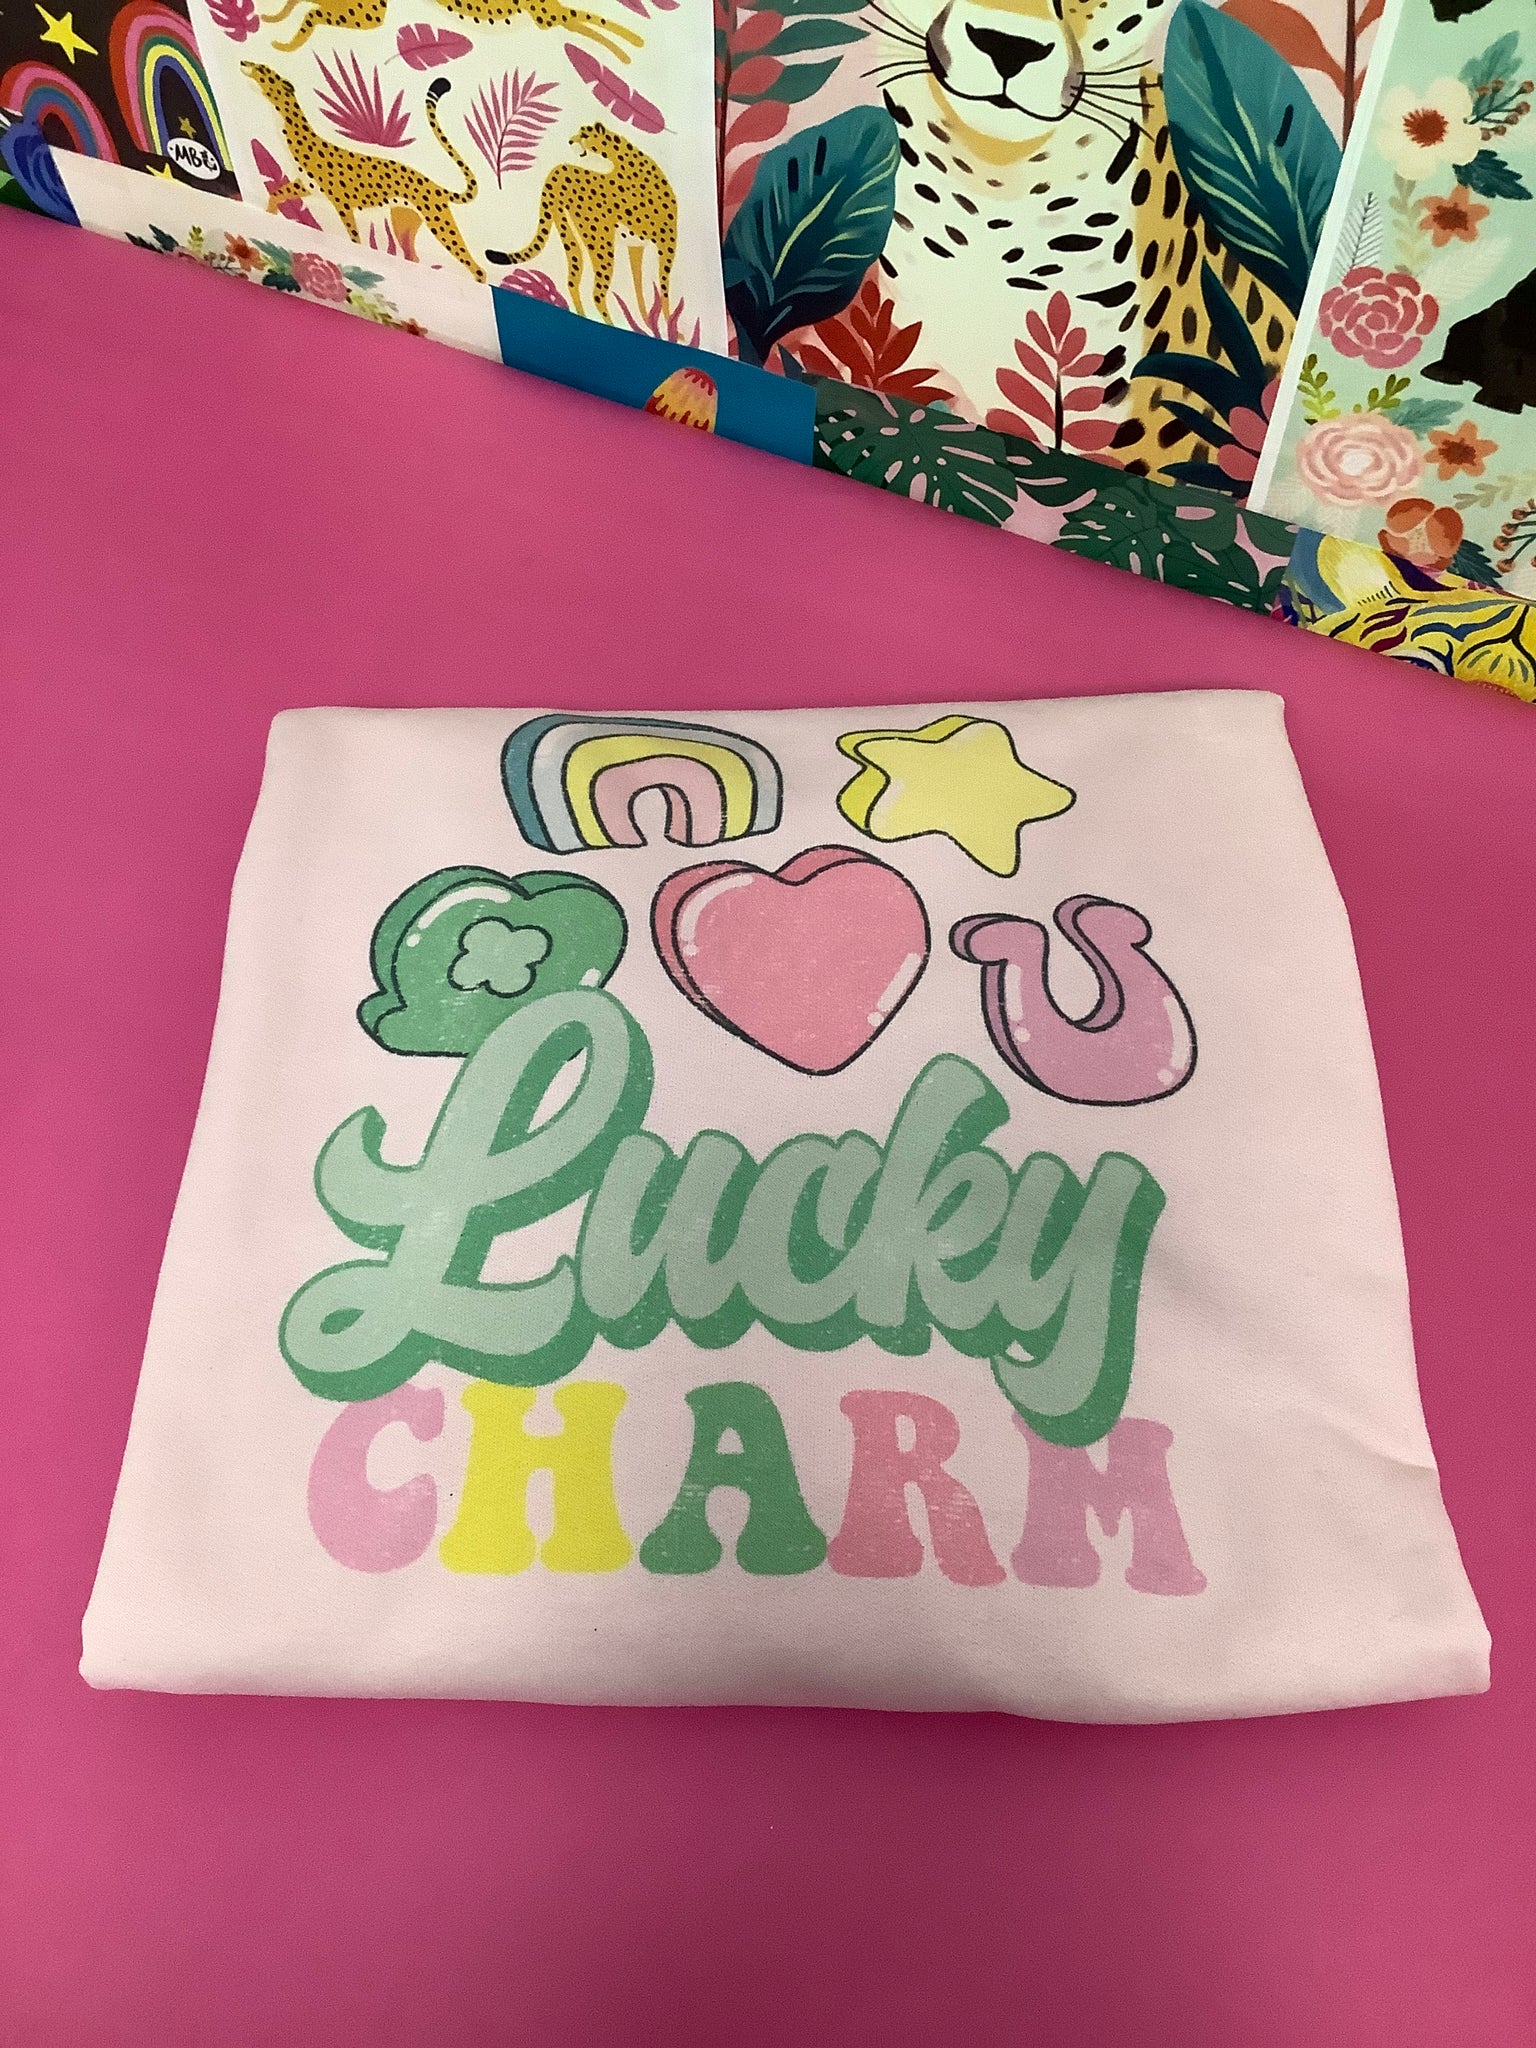 Lucky Charm Vintage Graphic Shirts - Choose T-shirt or Sweatshirt ~ Ships in 3-5 days ~ Custom Made~ please read descriptions before ordering